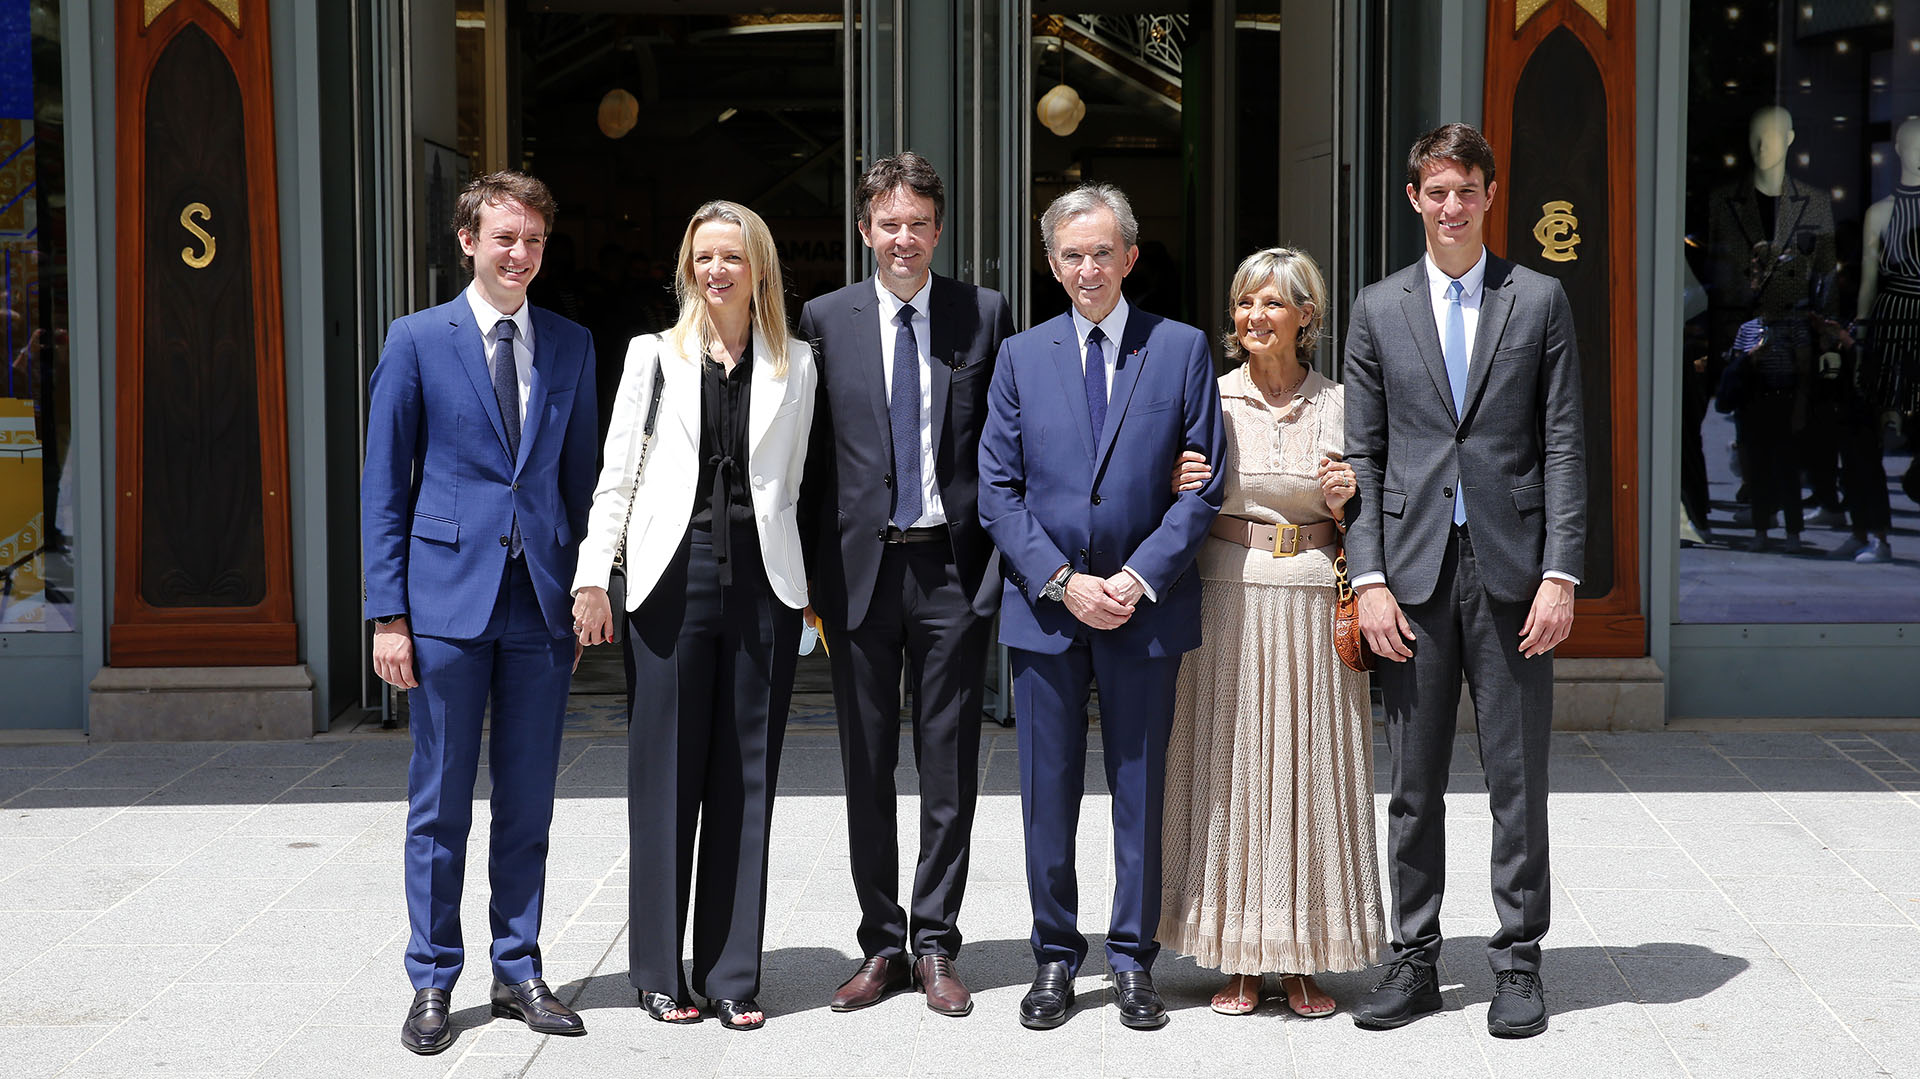 Bernard Arnault (center) and his wife Helene with their children (from left) Frederic Arnault, Delphine Arnault, Antoine Arnault and Alexandre Arnault posed for a photo in April 2021 (Chesnot/Getty Images)